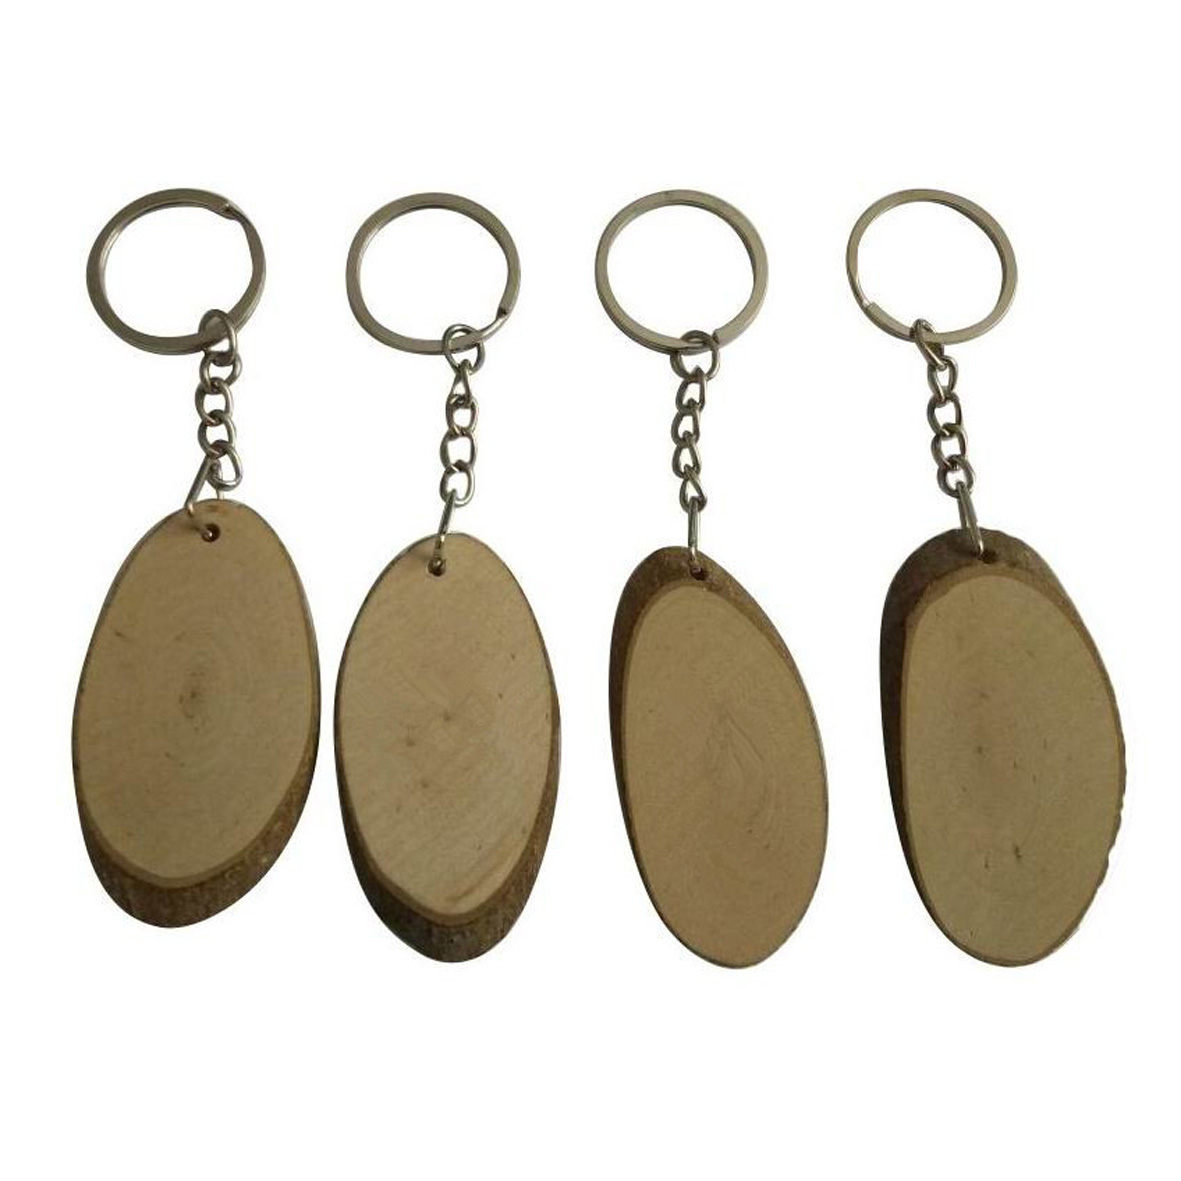 GL-ELY1010 Wooden Keychain